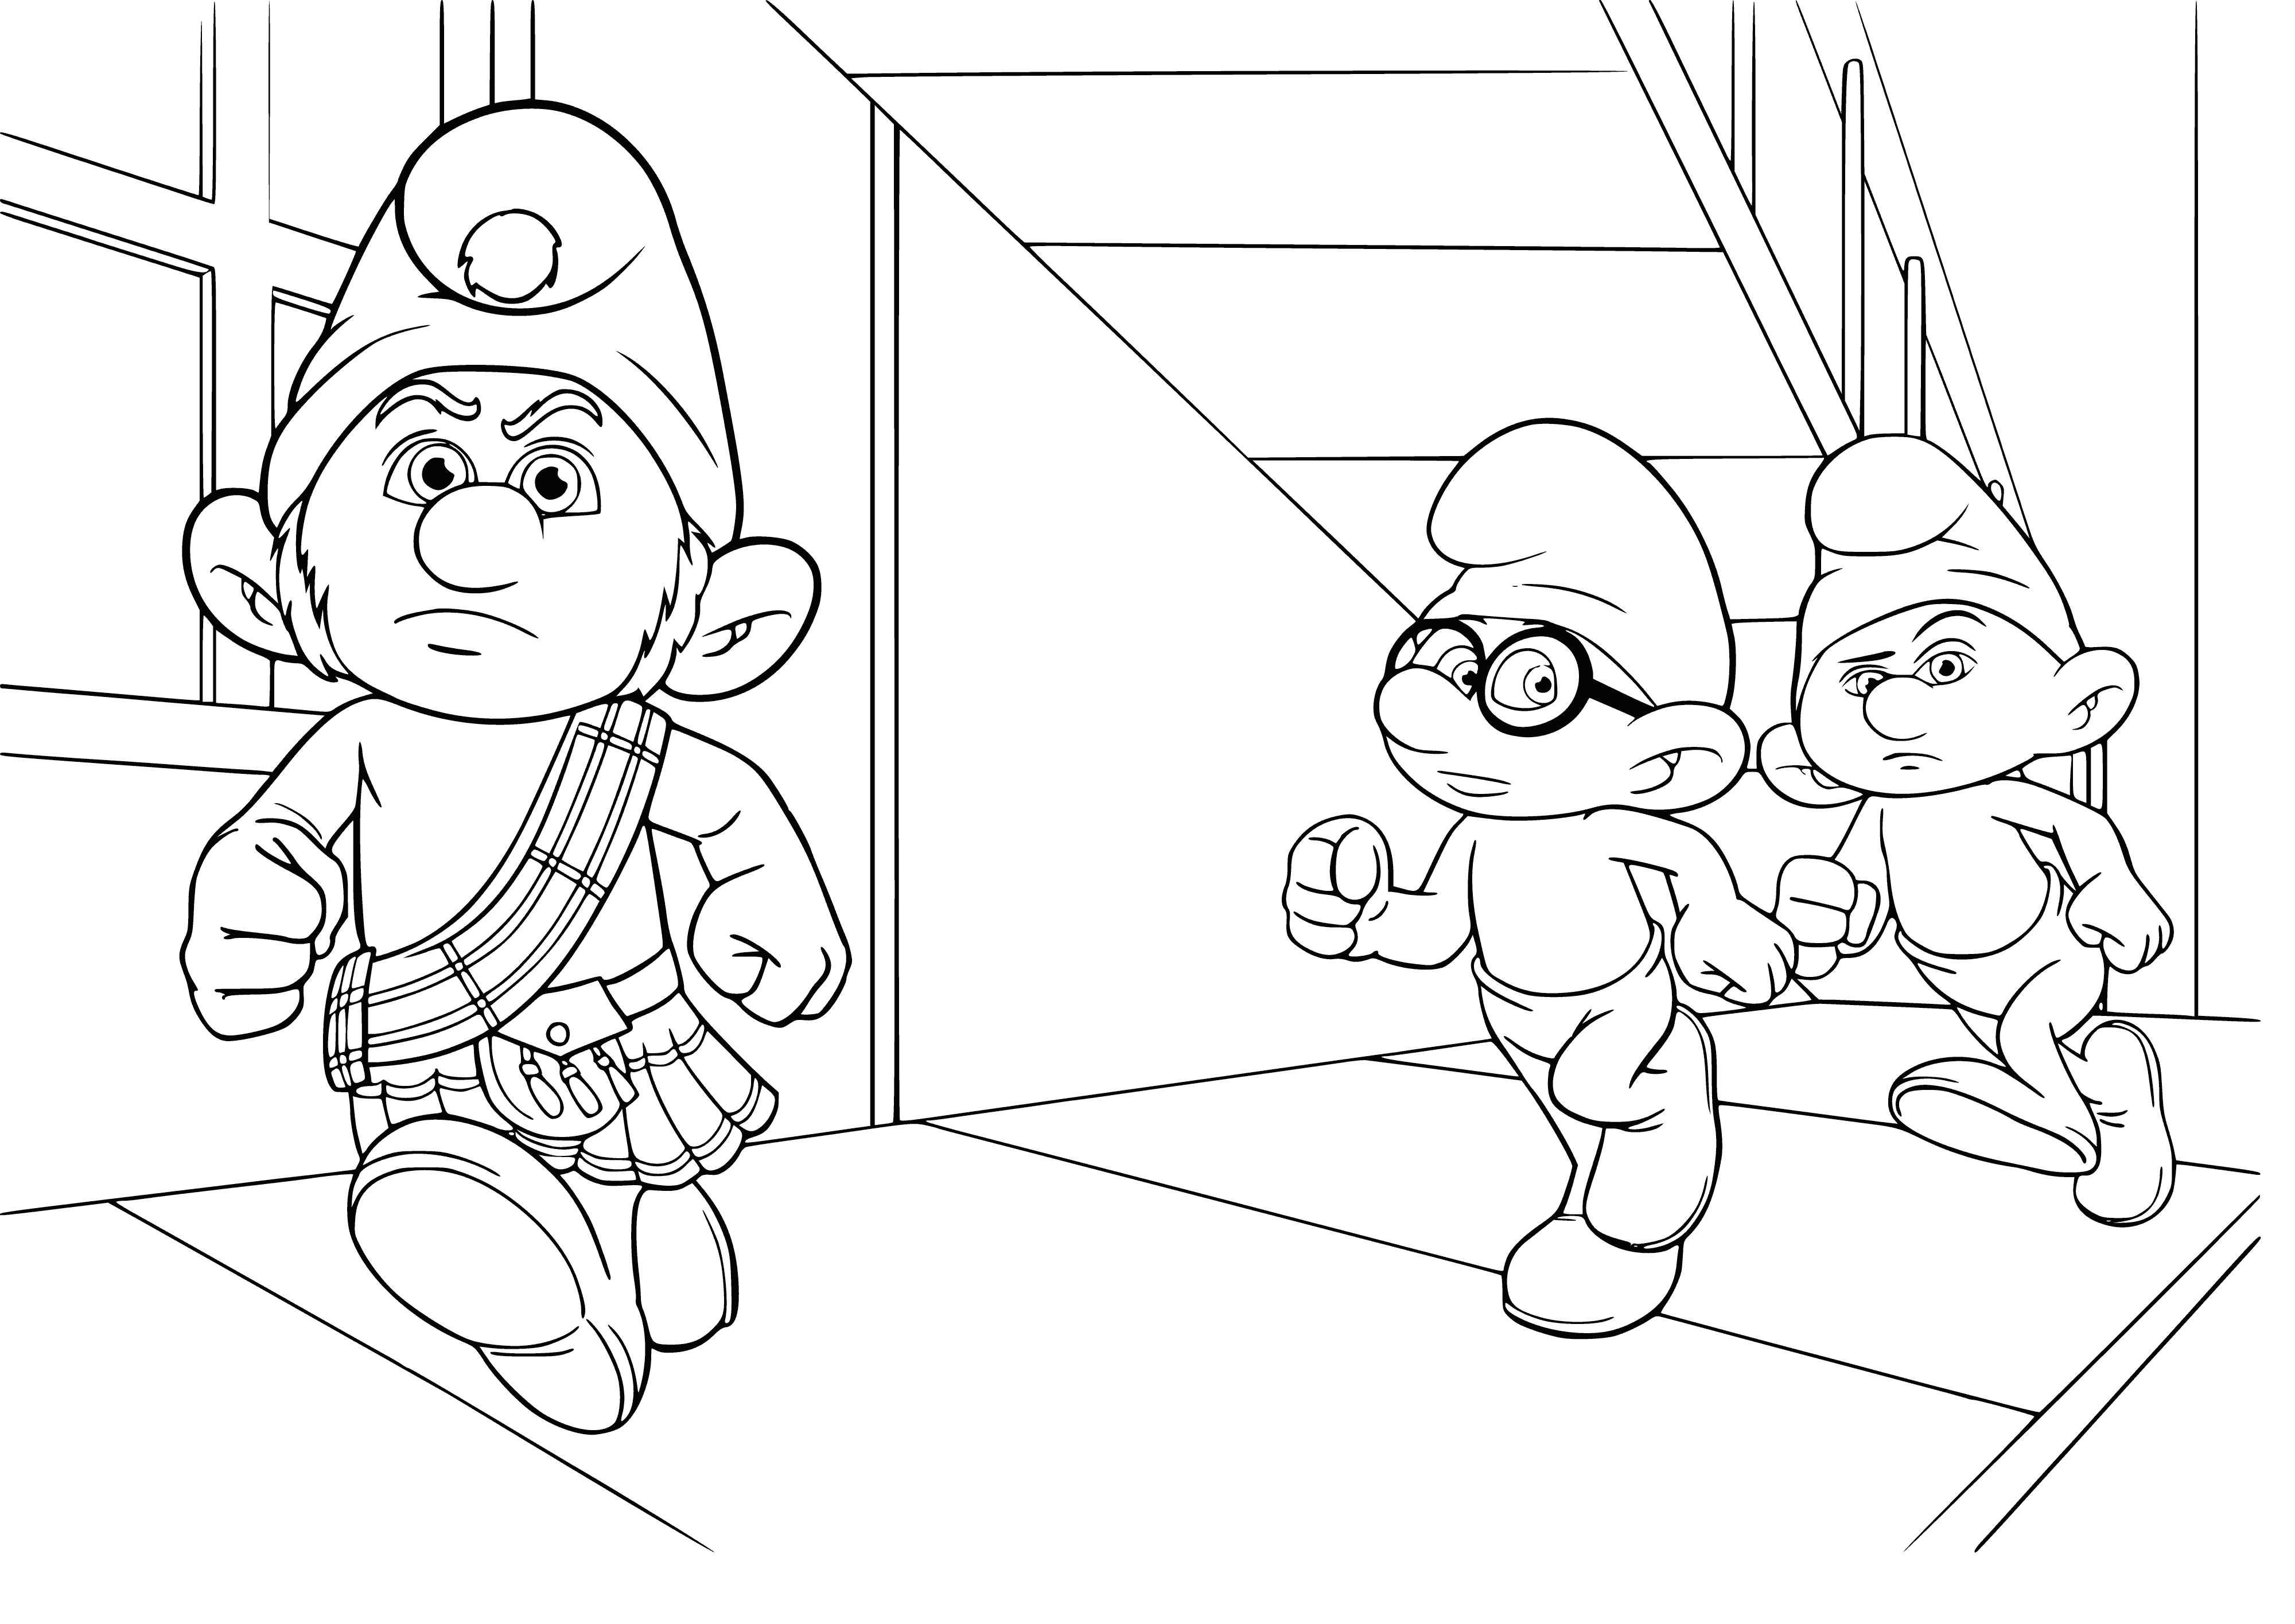 Smurfs on the street coloring page